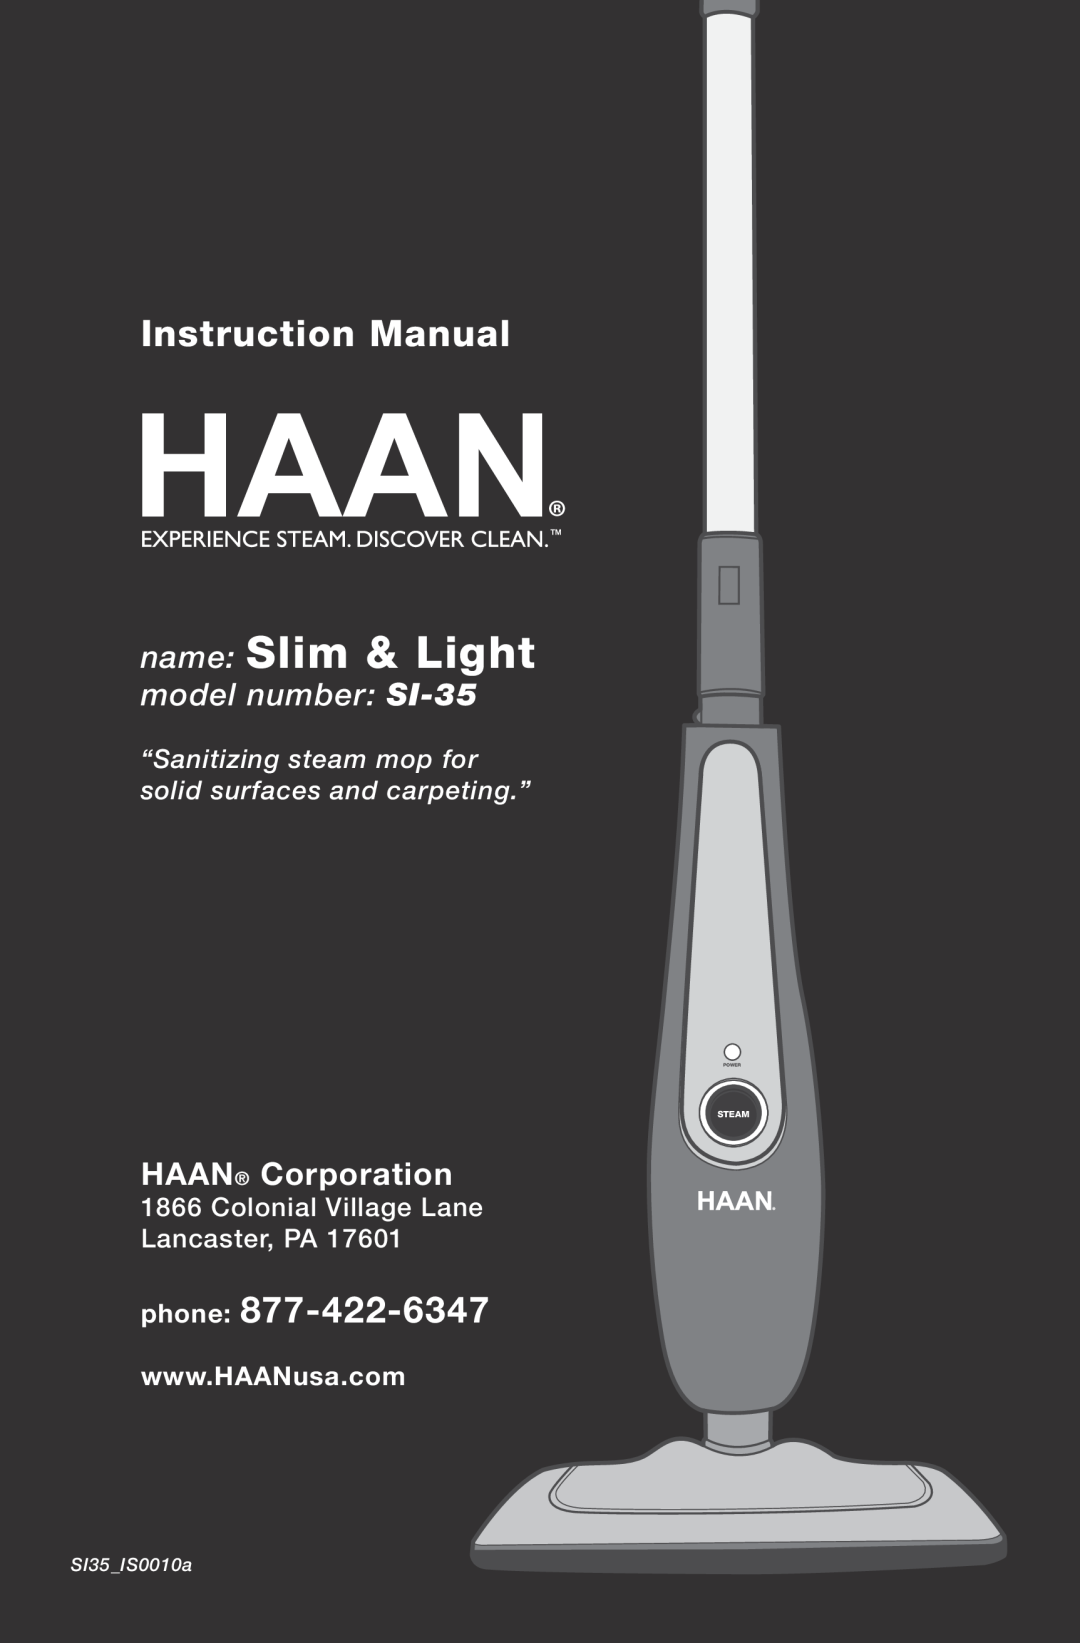 Haan instruction manual phone, HAAN Corporation, name Slim & Light, model number SI-35, SI35 IS0010a, Steam, Power 